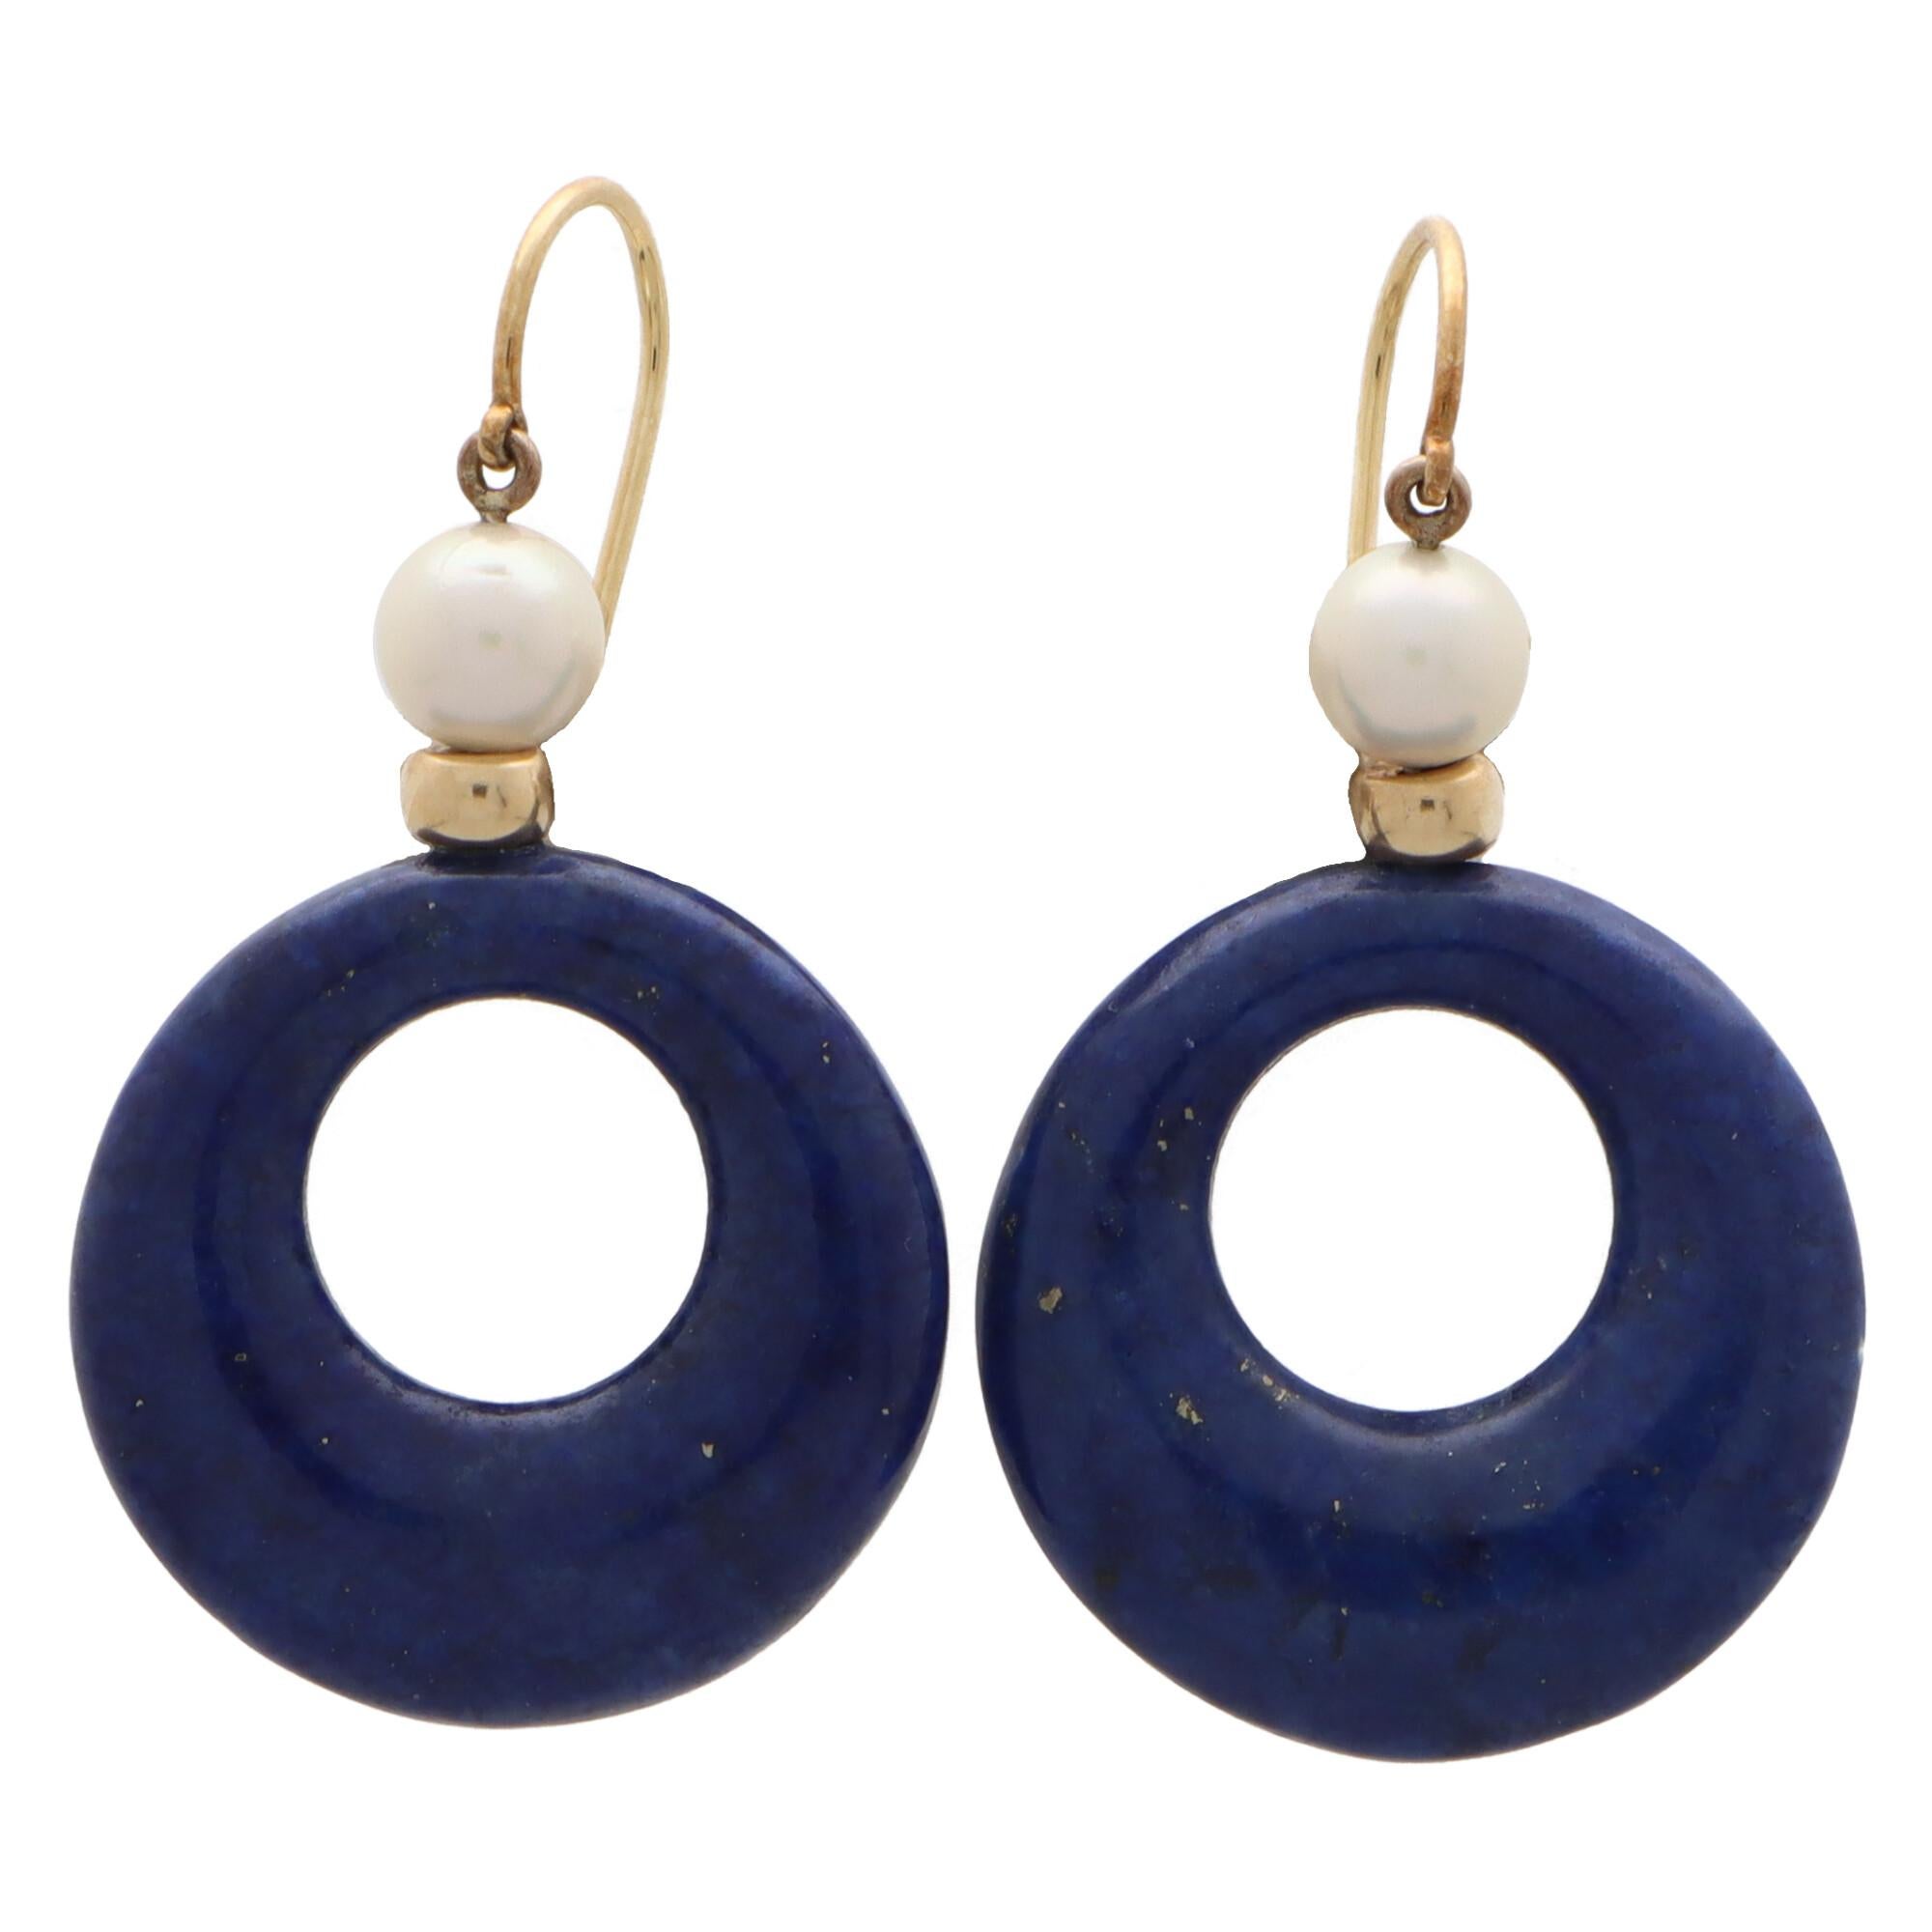 Round Cut Vintage Pearl and Lapis Lazuli Drop Earrings Set in 18k Yellow Gold